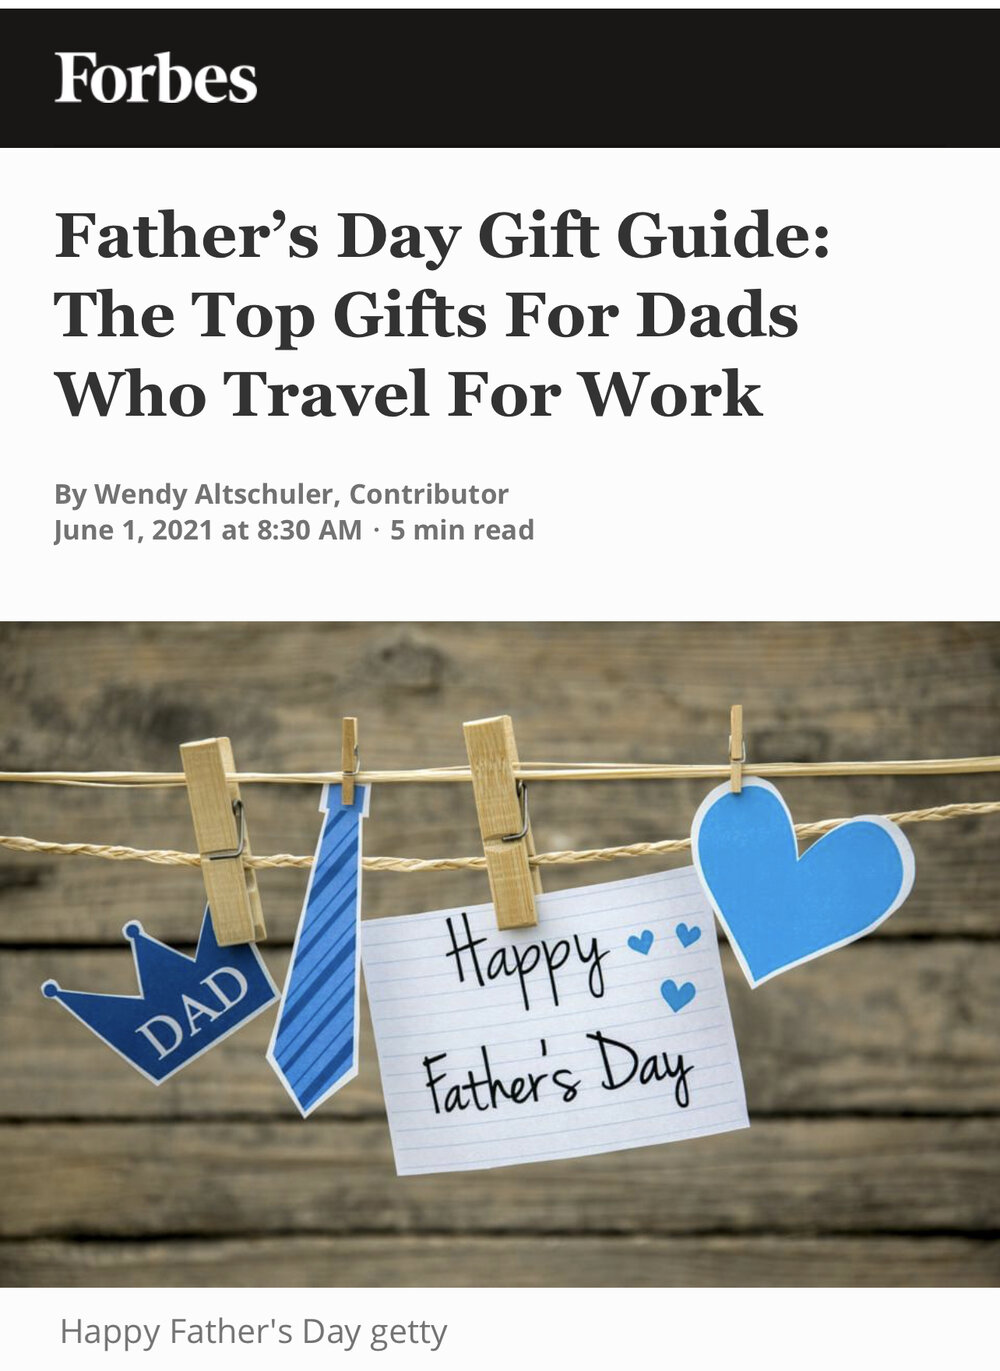 Father’s Day Gift Guide: The Top Gifts For Dads Who Travel For Work